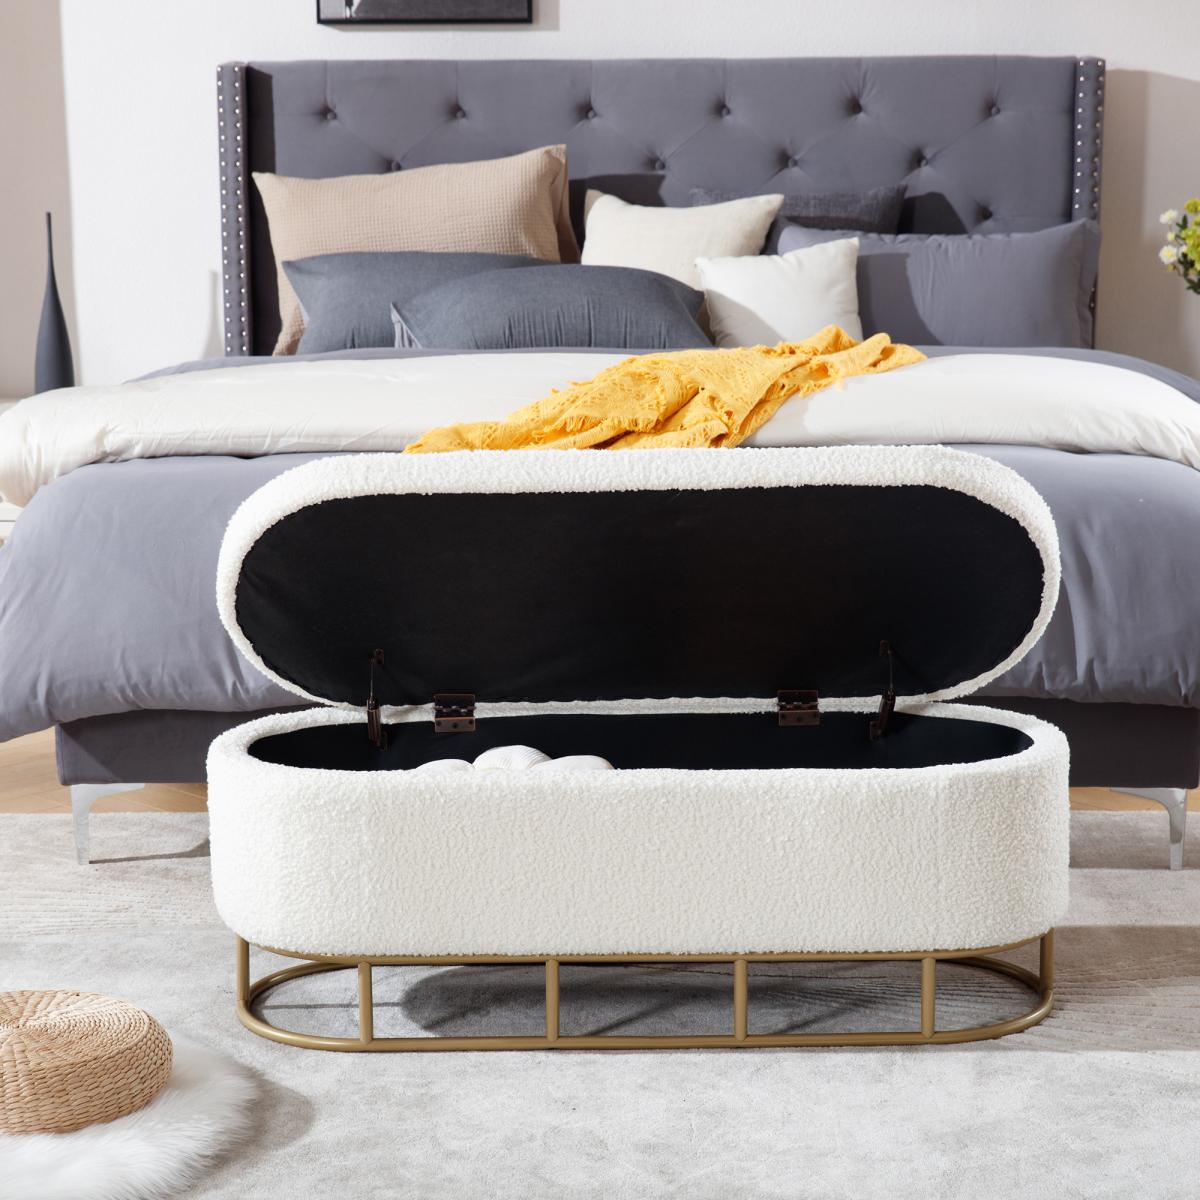 Oval Storage Bench for Living Room Bedroom End of Bed,Sherpa Fabric Plush Upholstered Storage Ottoman Entryway Bench With Metal Legs,Cream